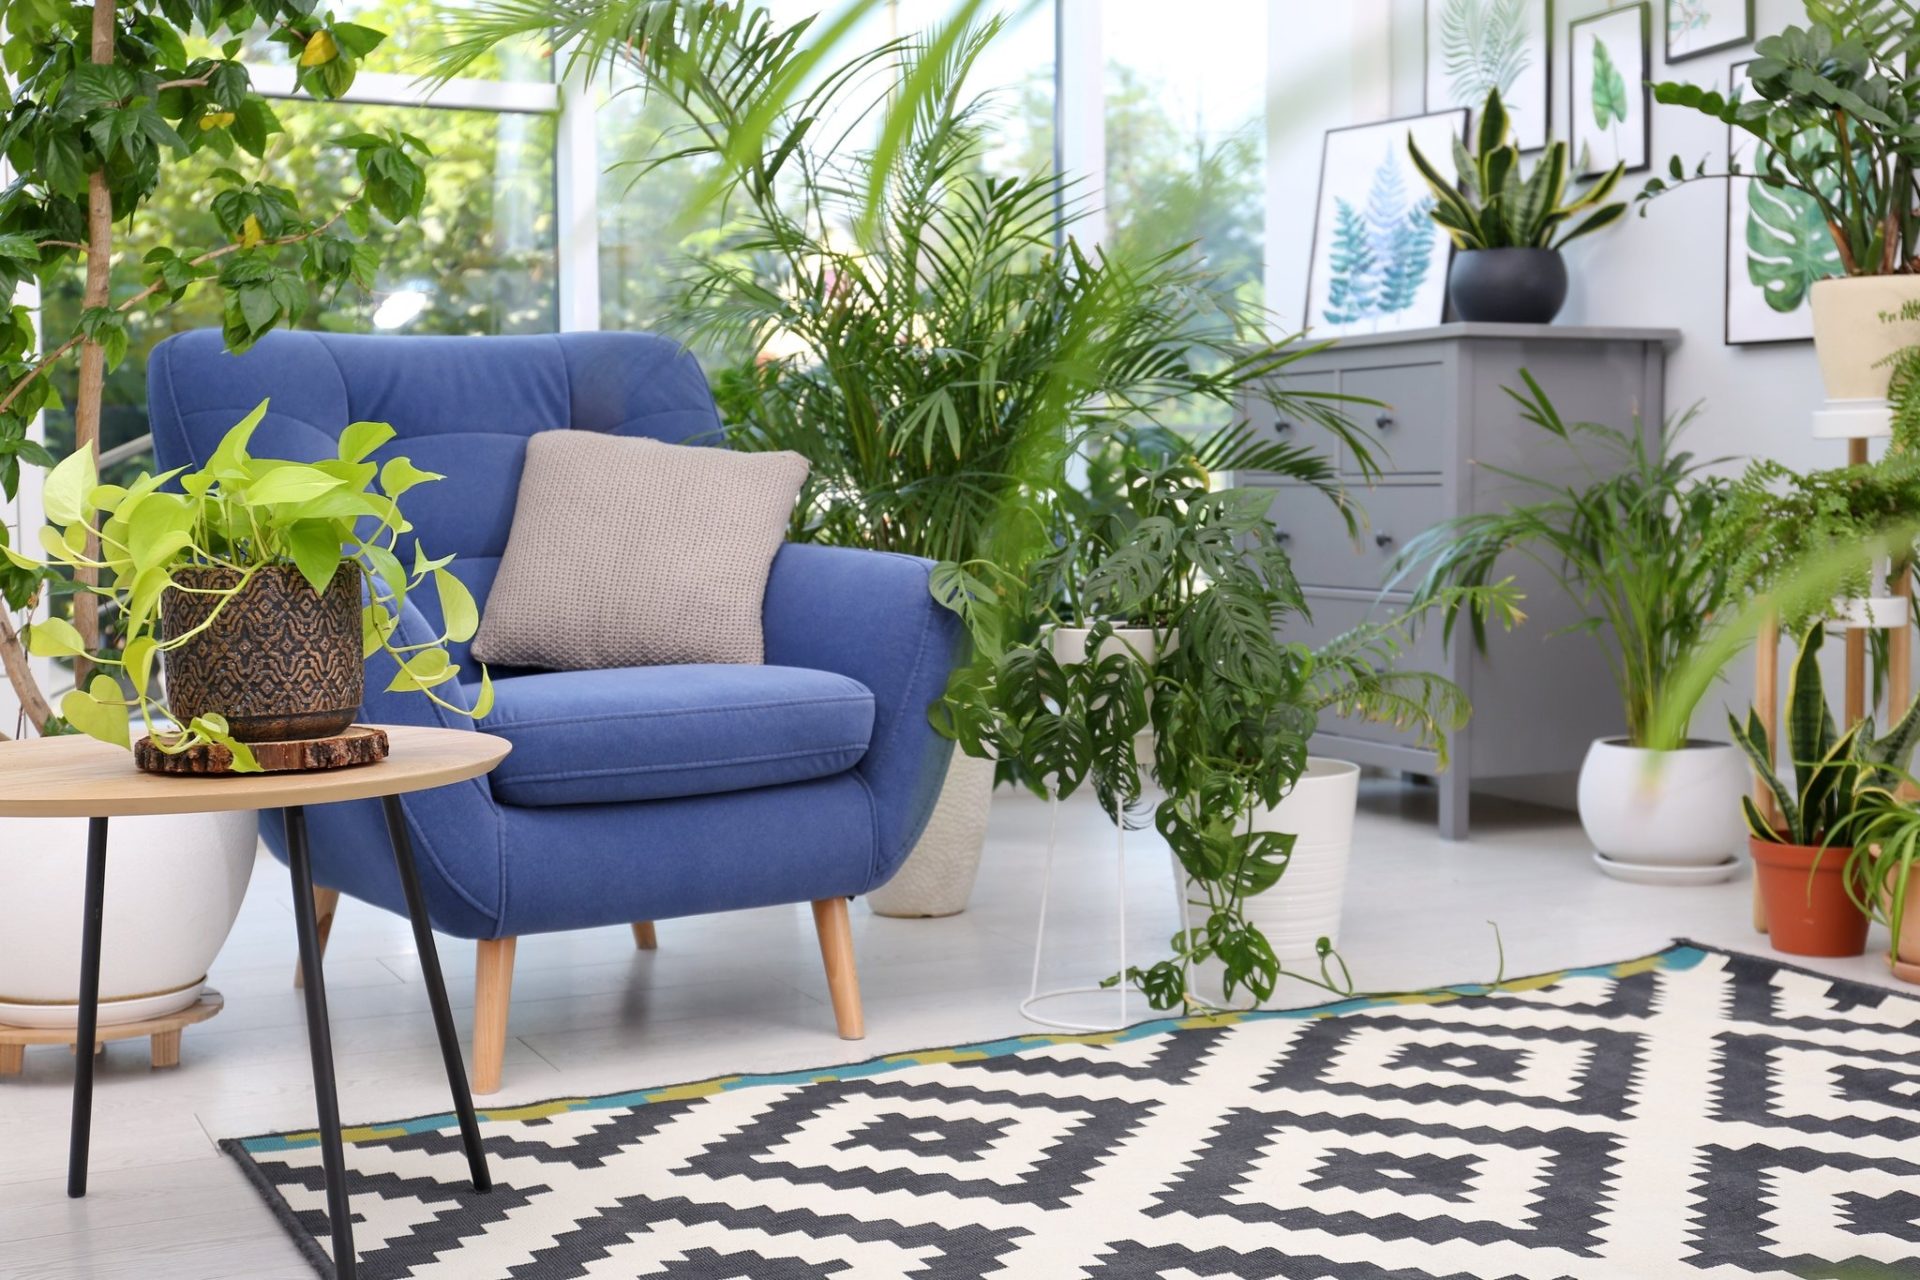 These Are the Best Living Room Furniture Pieces in 2022